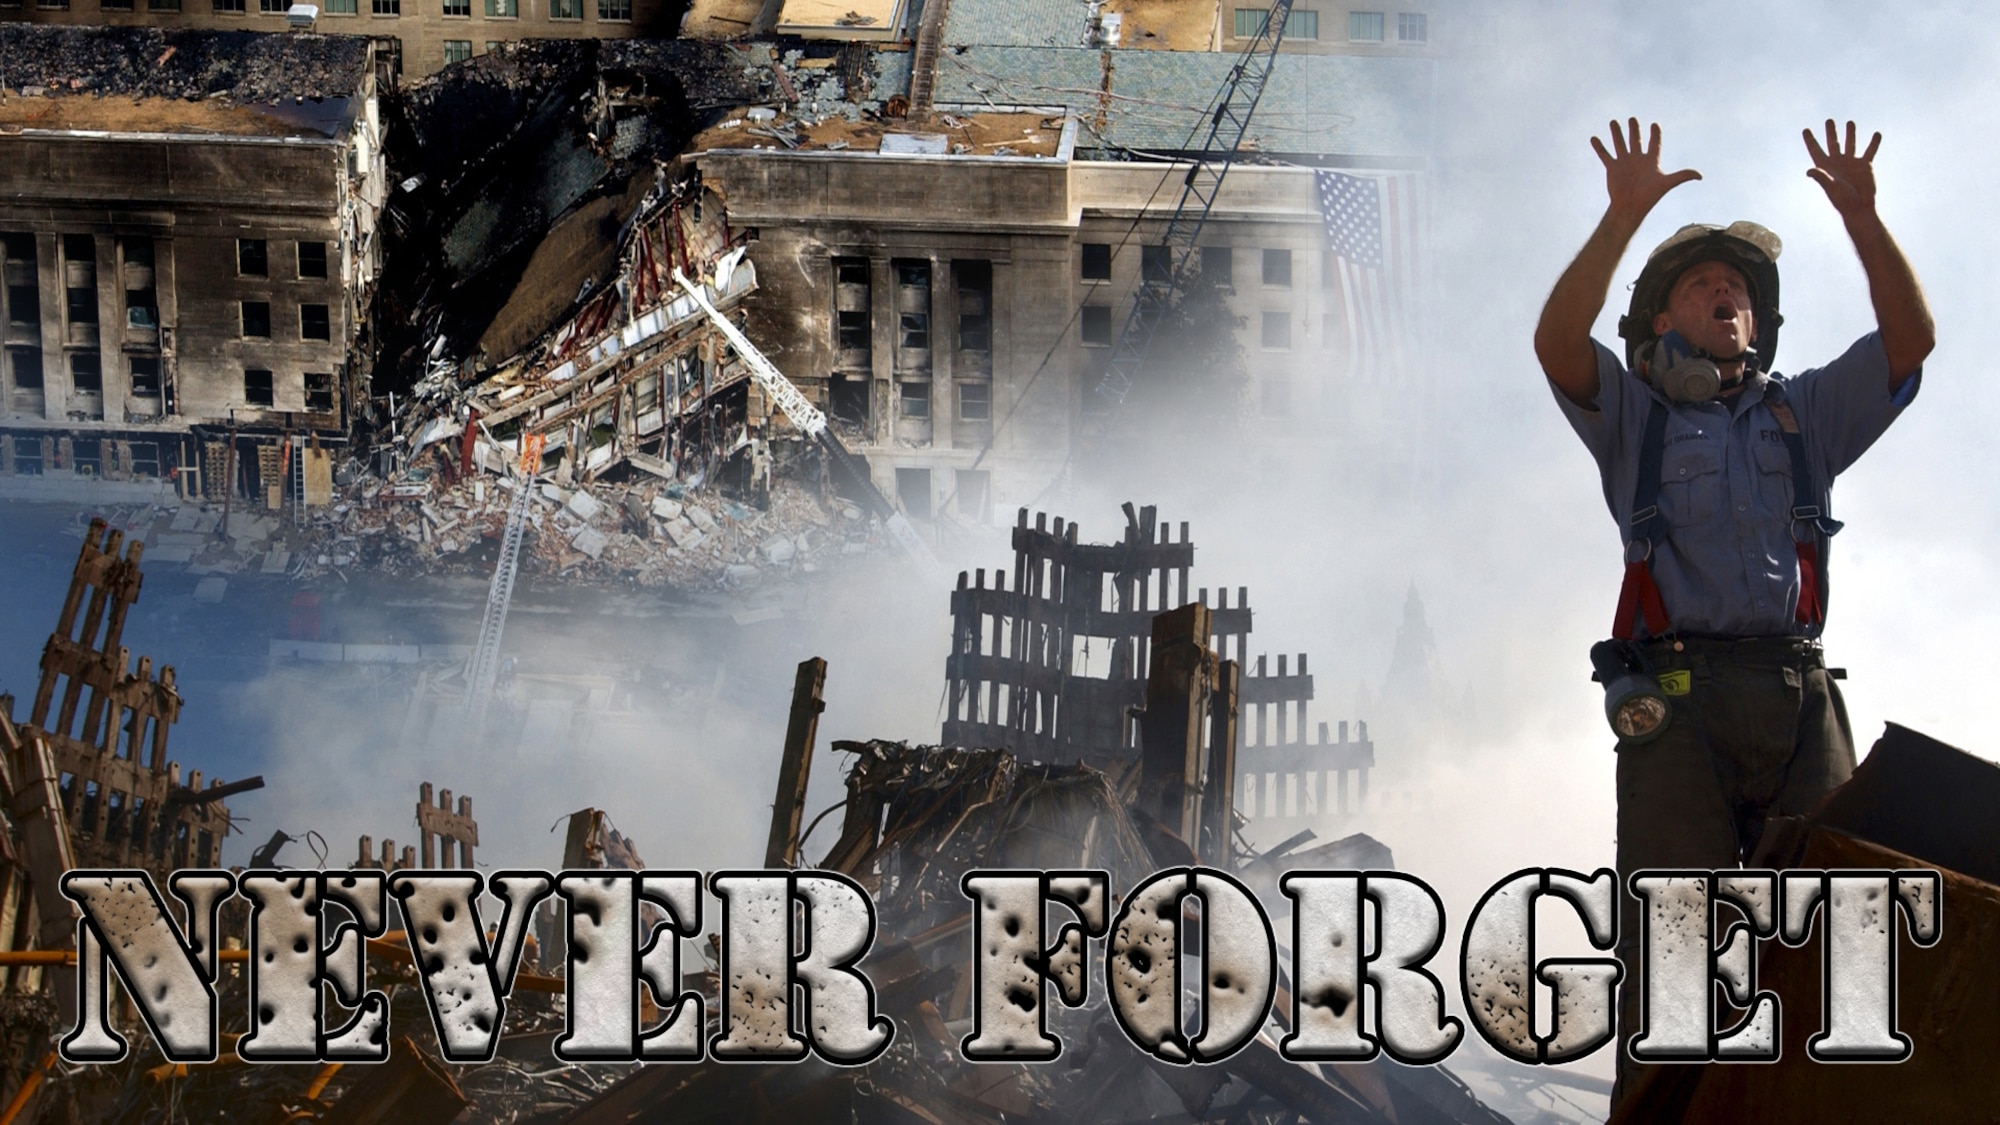 Never forget the events of September 11, 2001.